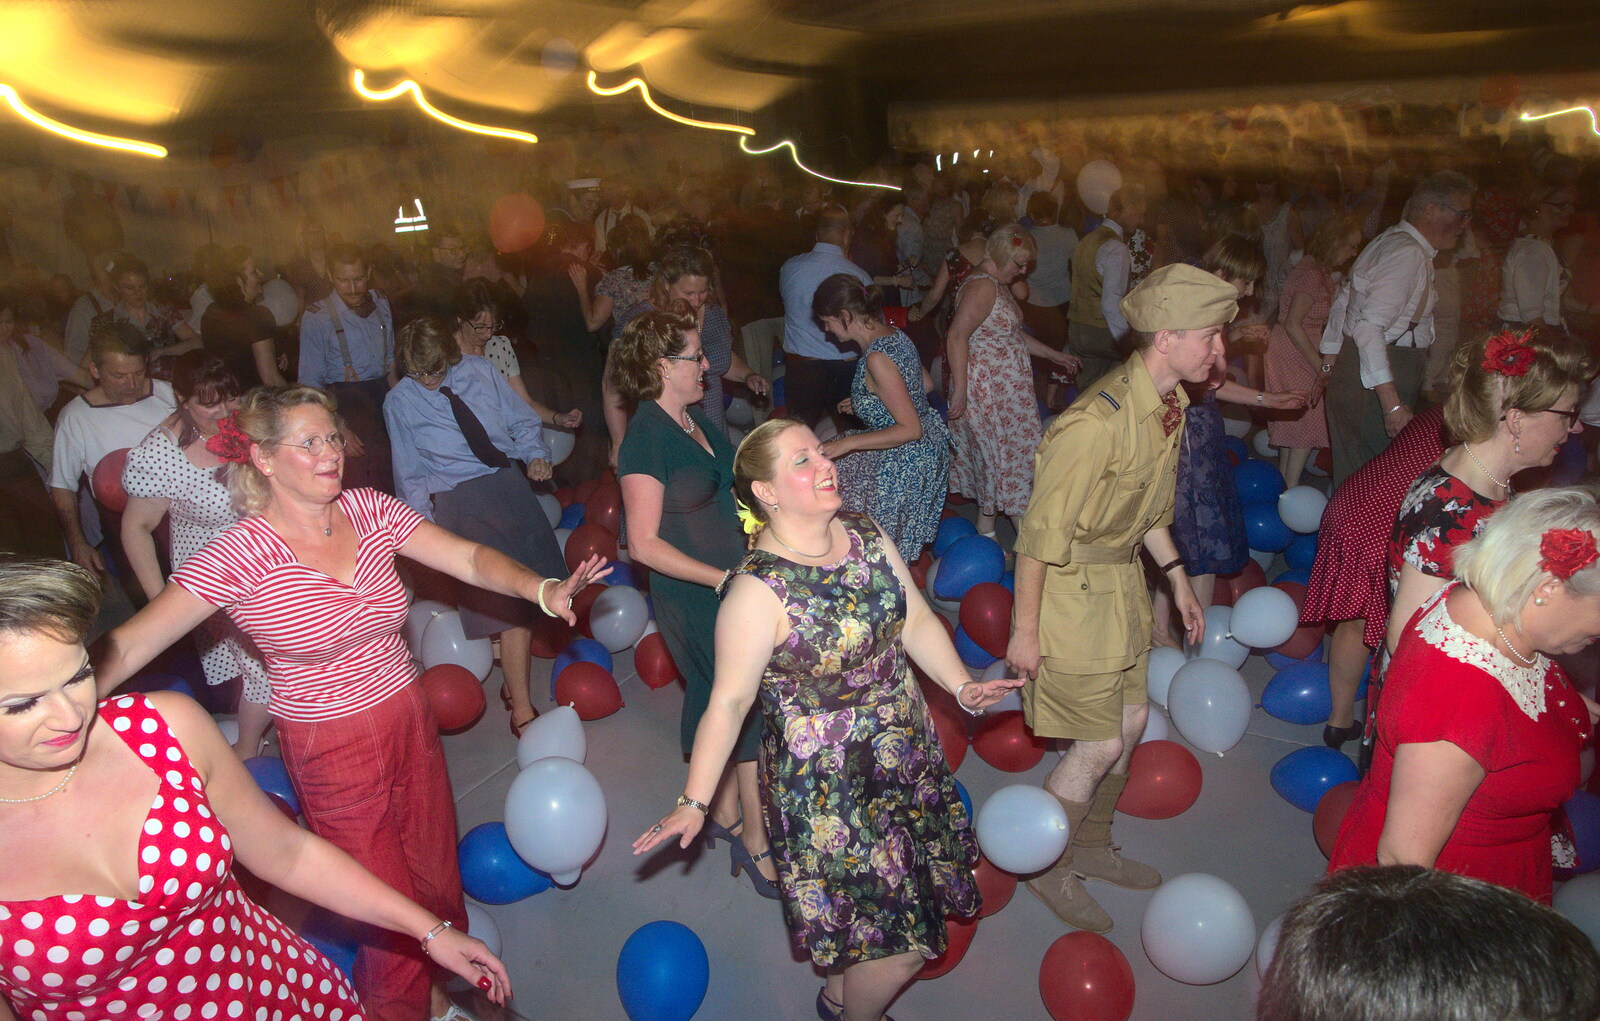 Some kind of 1940s line-dancing is going on from "Our Little Friends" Warbirds Hangar Dance, Hardwick, Norfolk - 9th July 2016